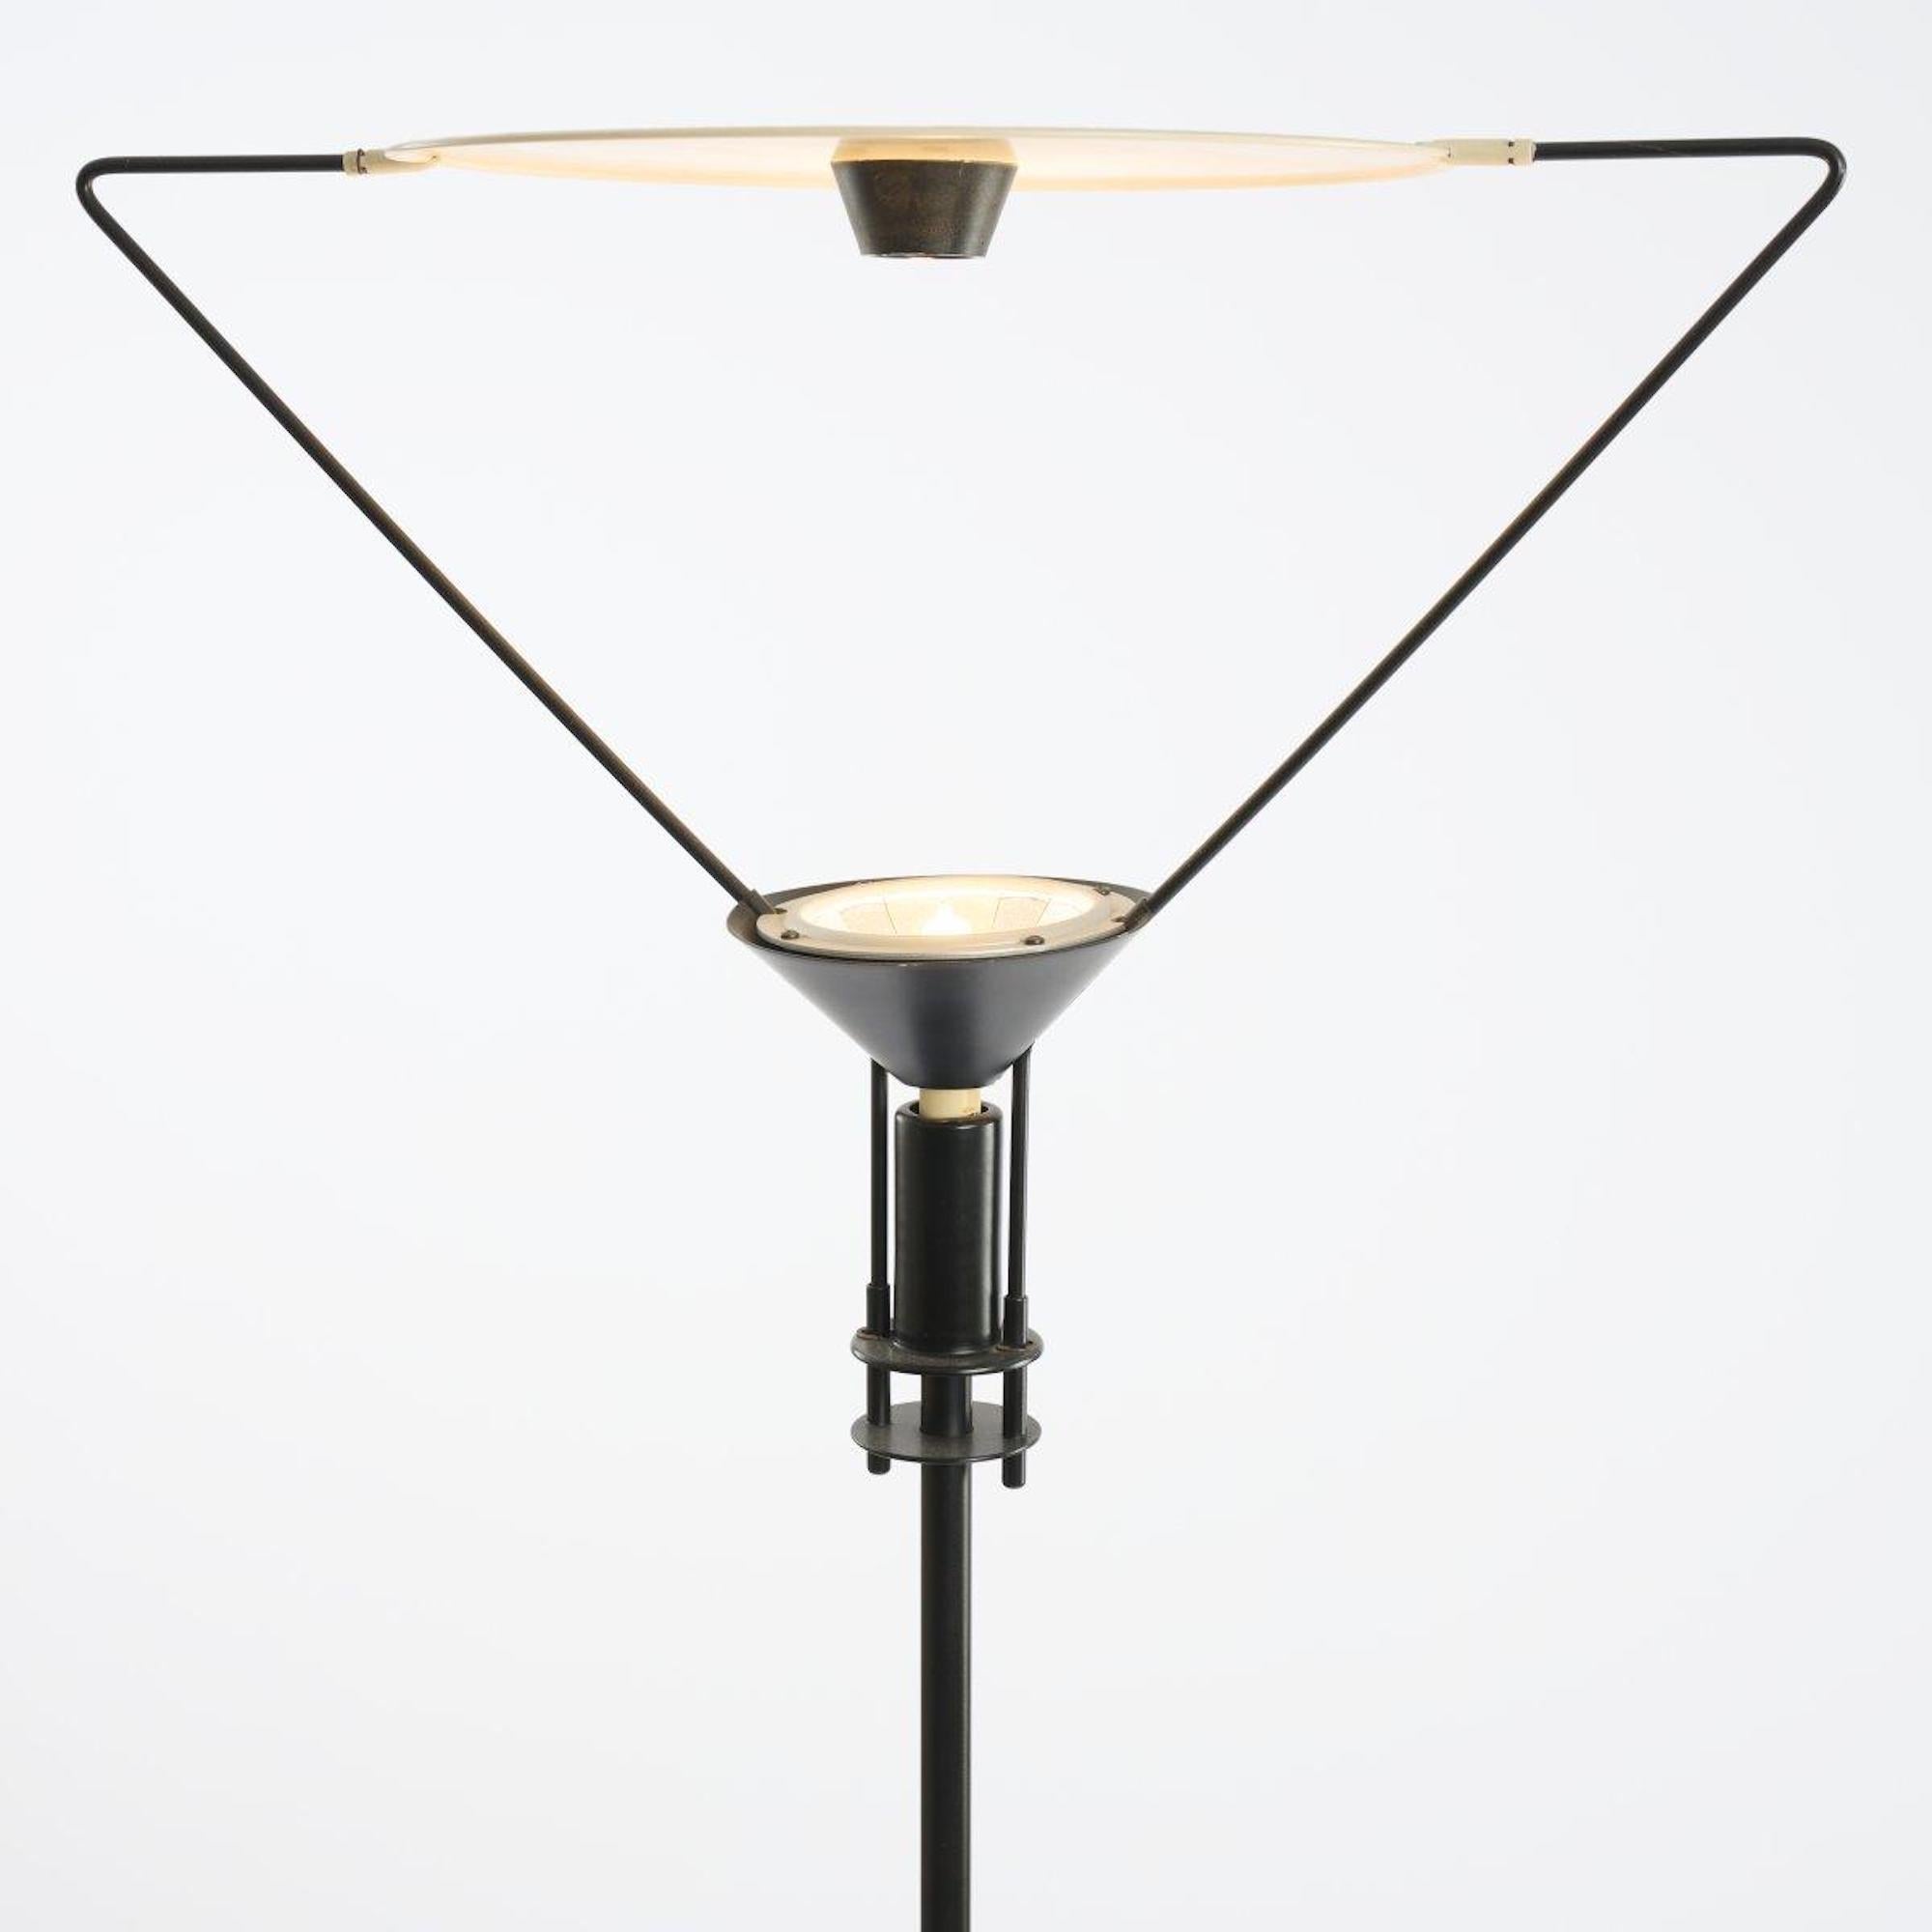 Italian Polifemo Floor Lamp by Carlo Forcolini for Artemide, Italy 1983 For Sale